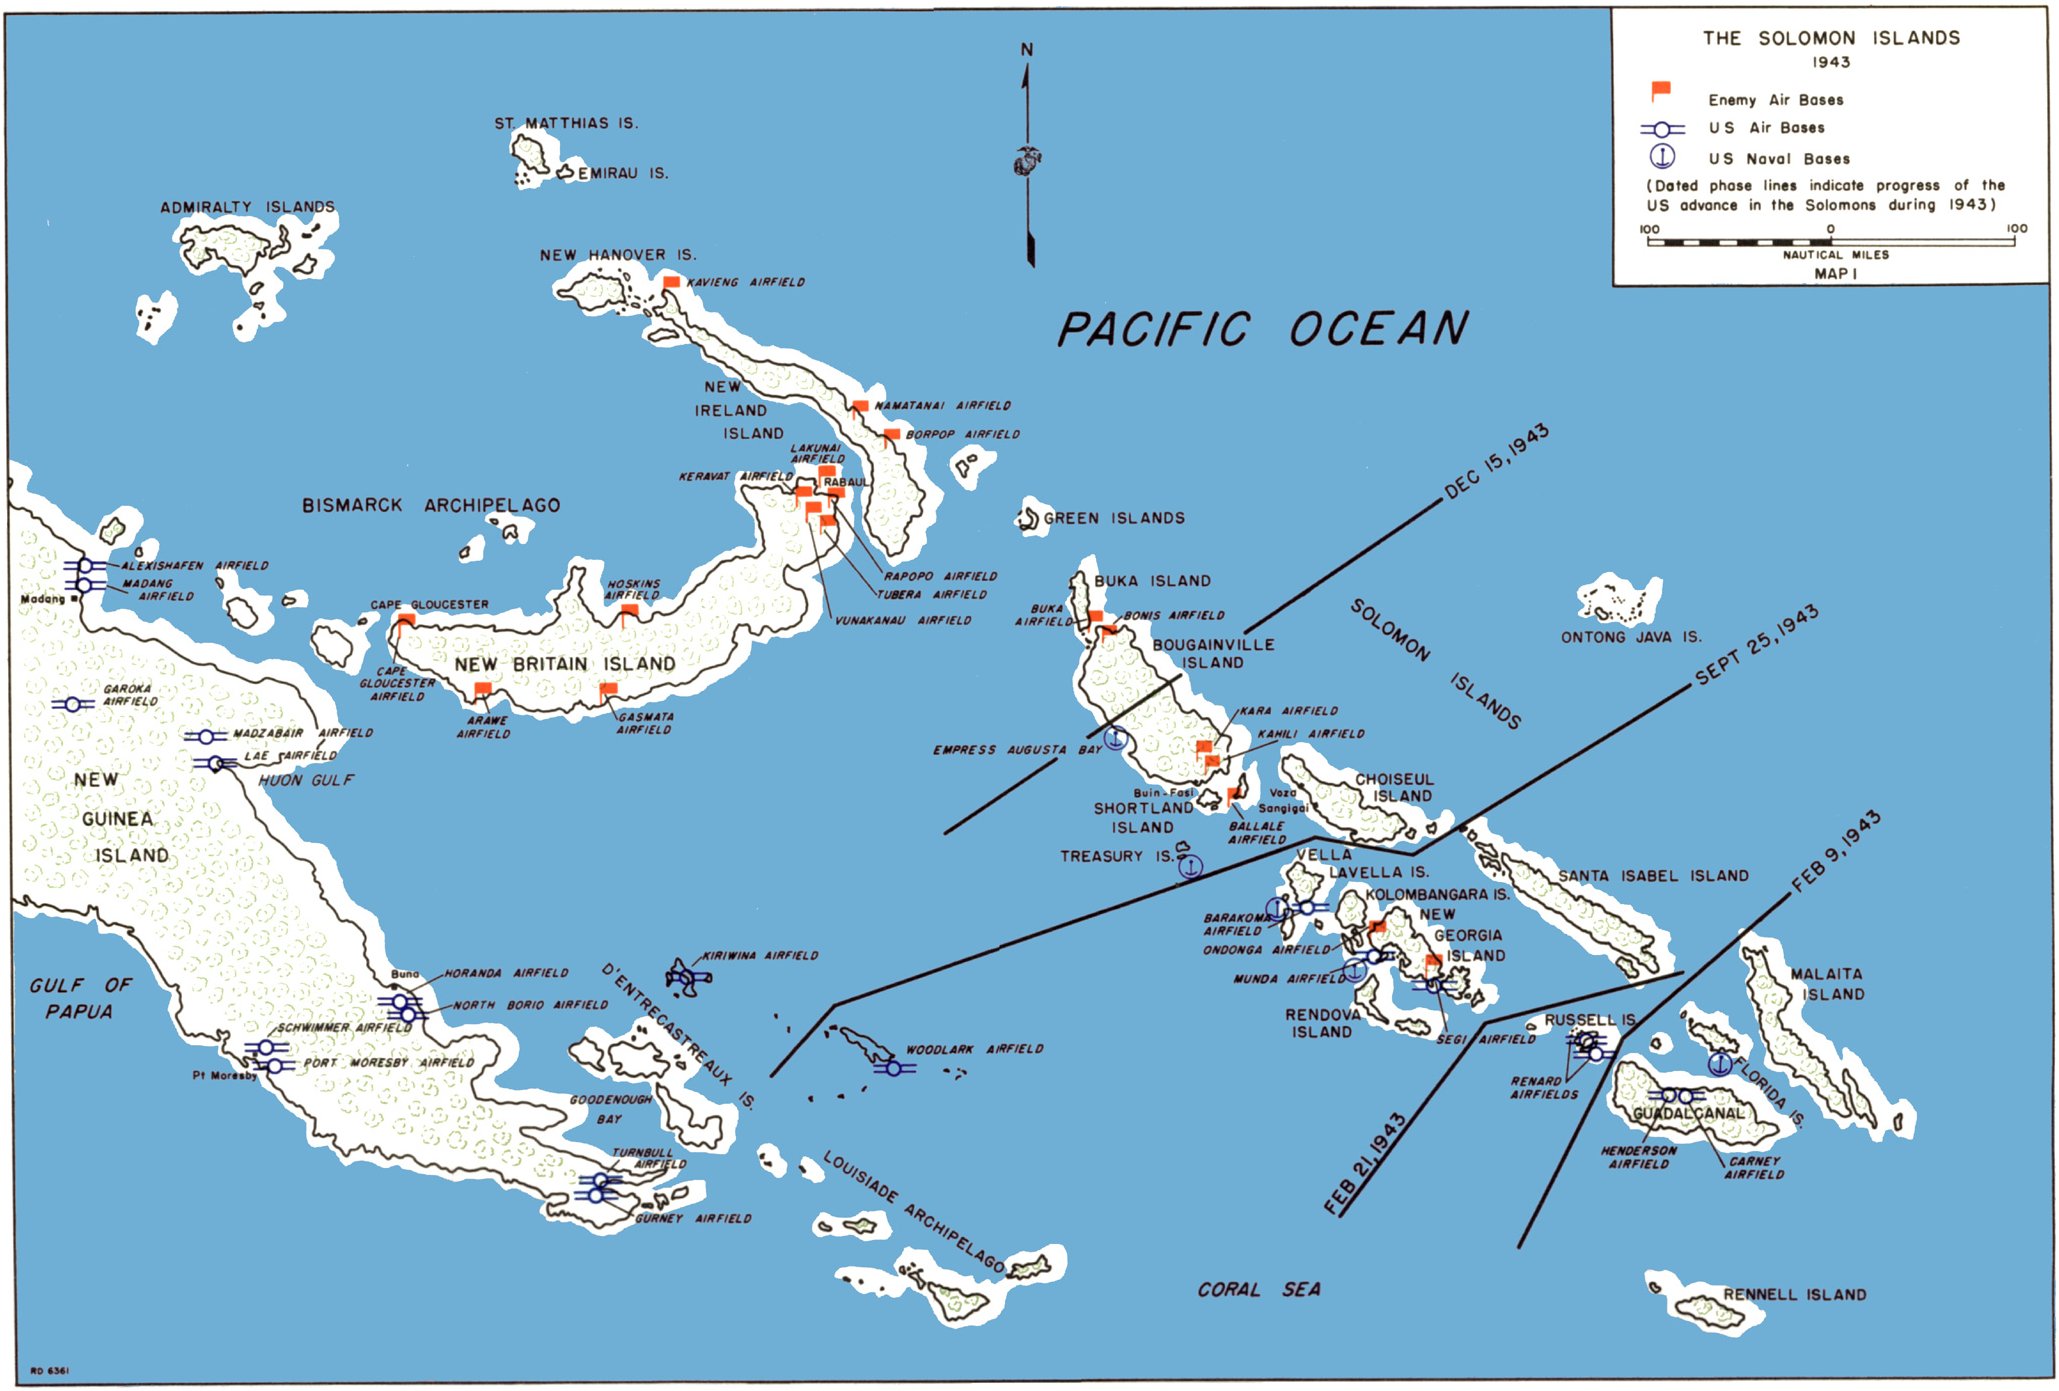 Map noting the Solomon Islands situation in 1943